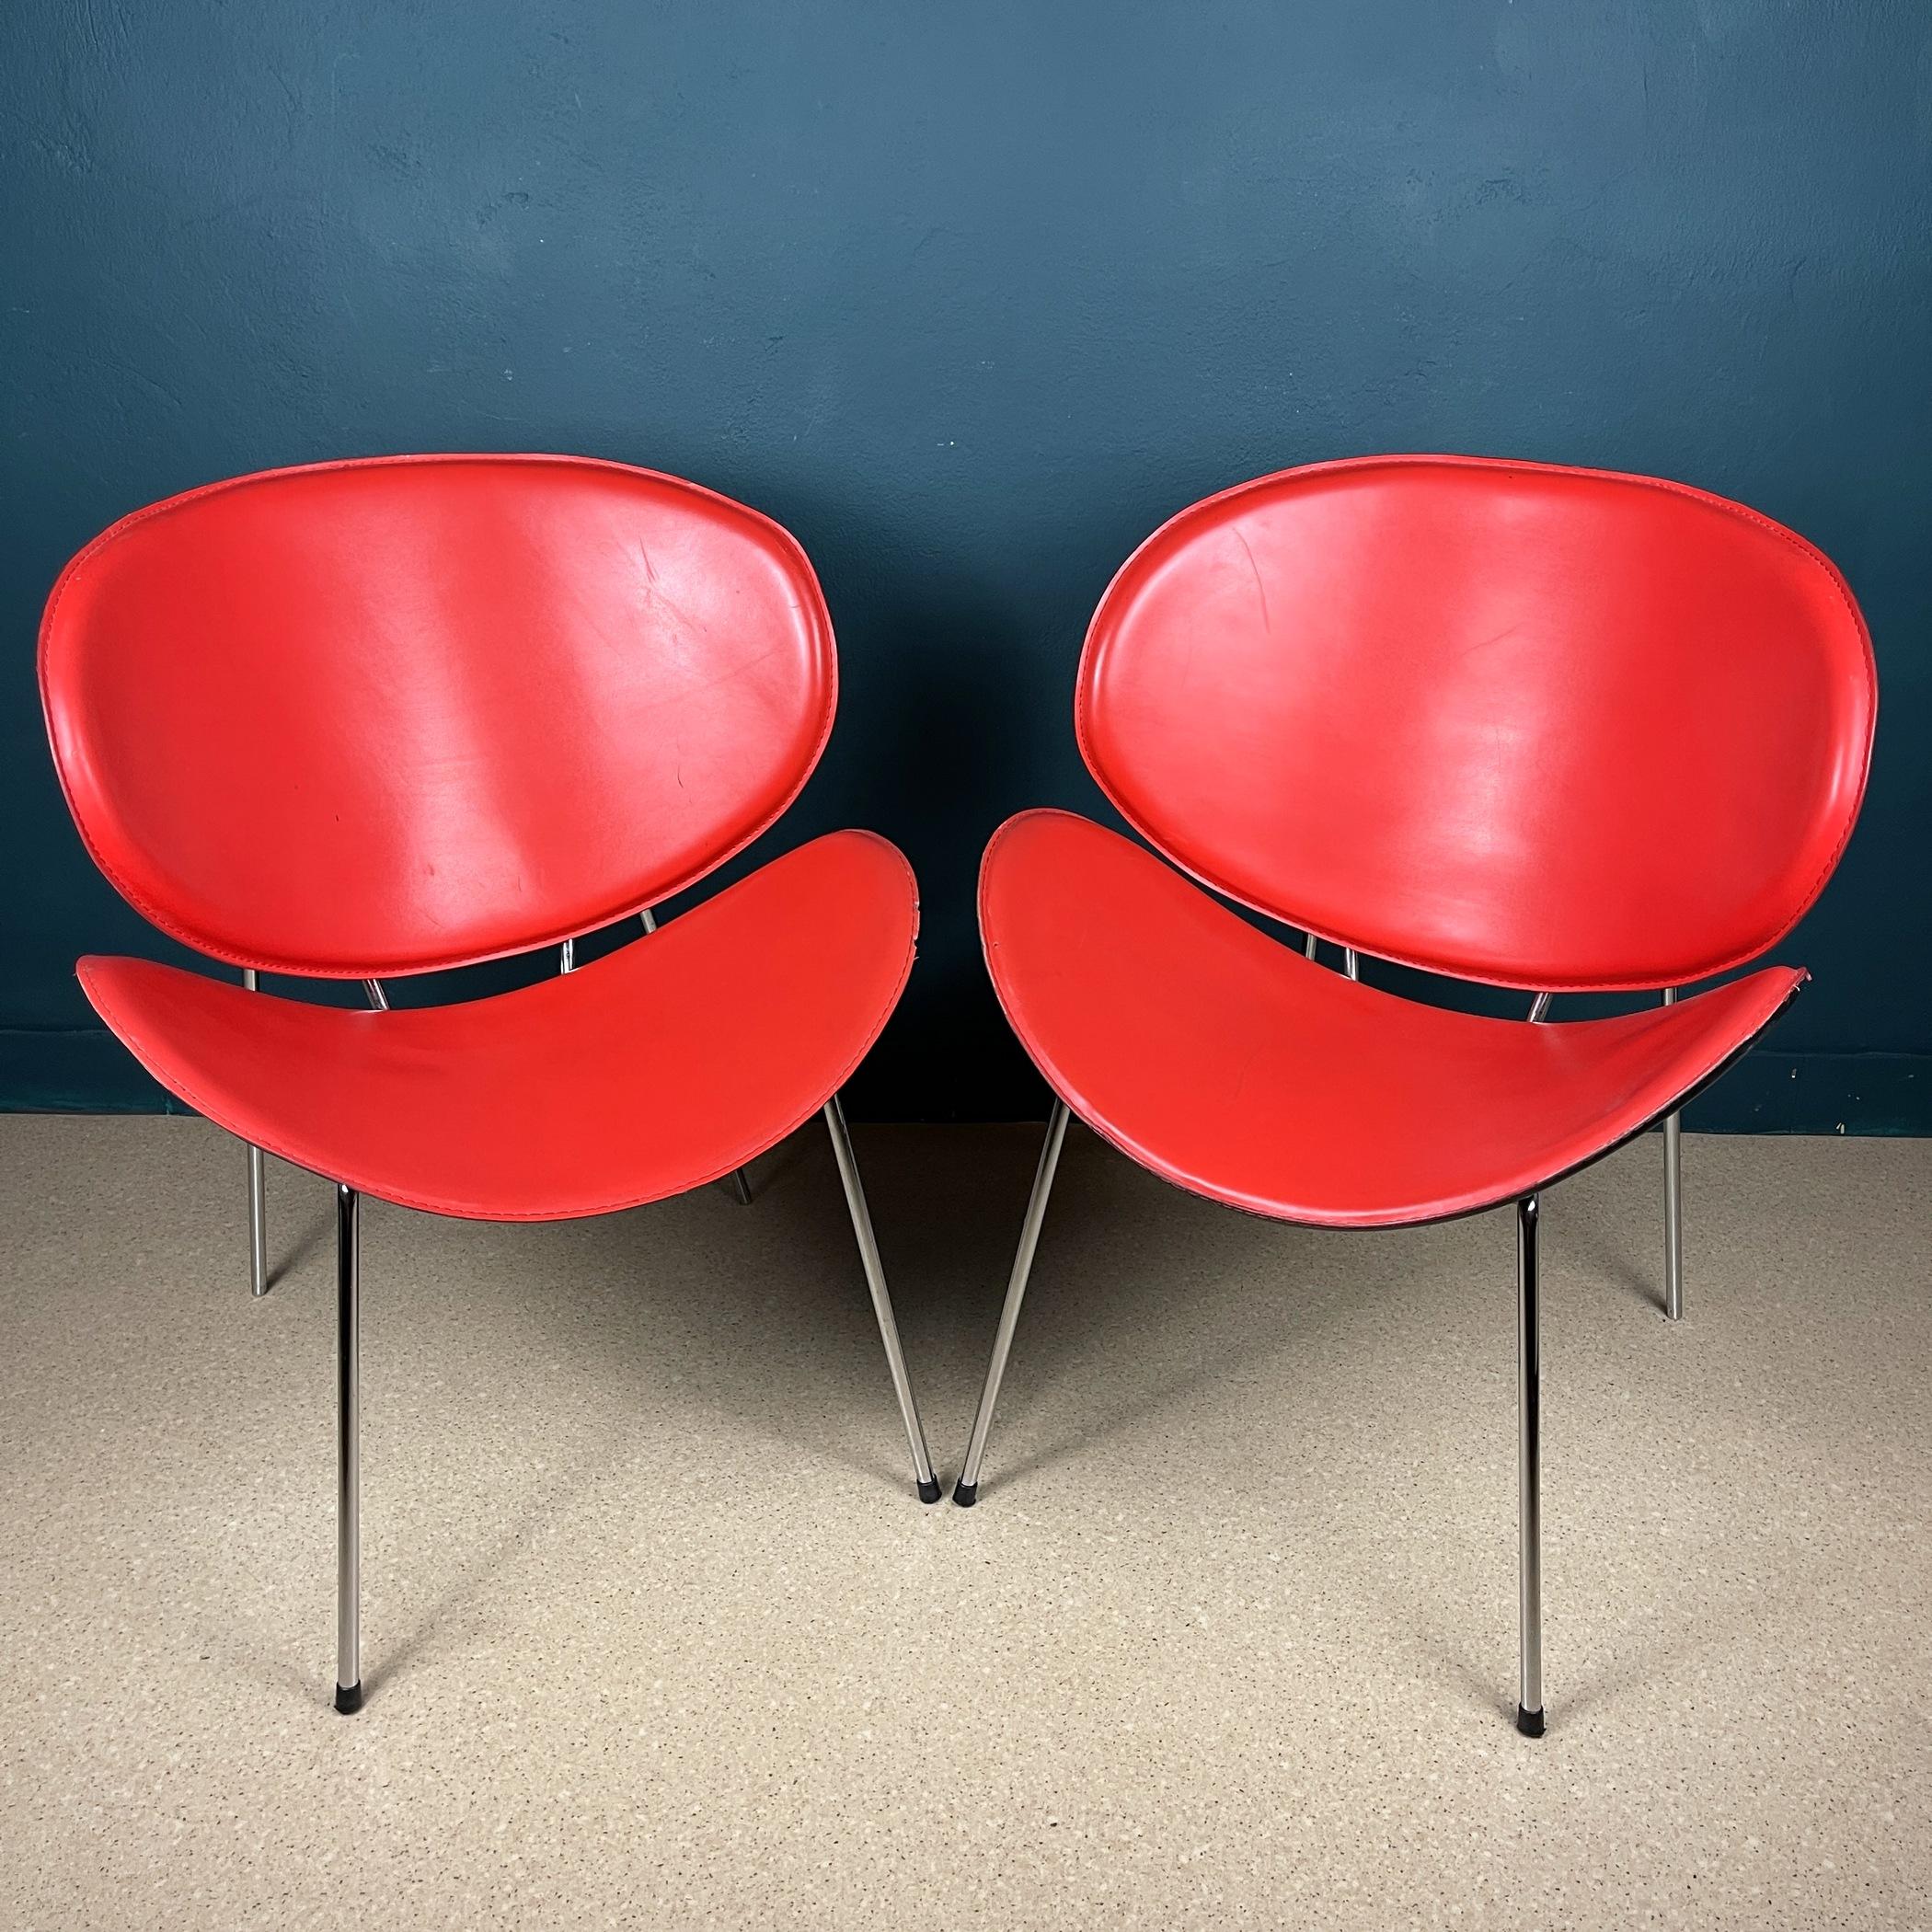 Pair of red lounge chairs Italy 1990s Design Pierre Paulin Style For Sale 1